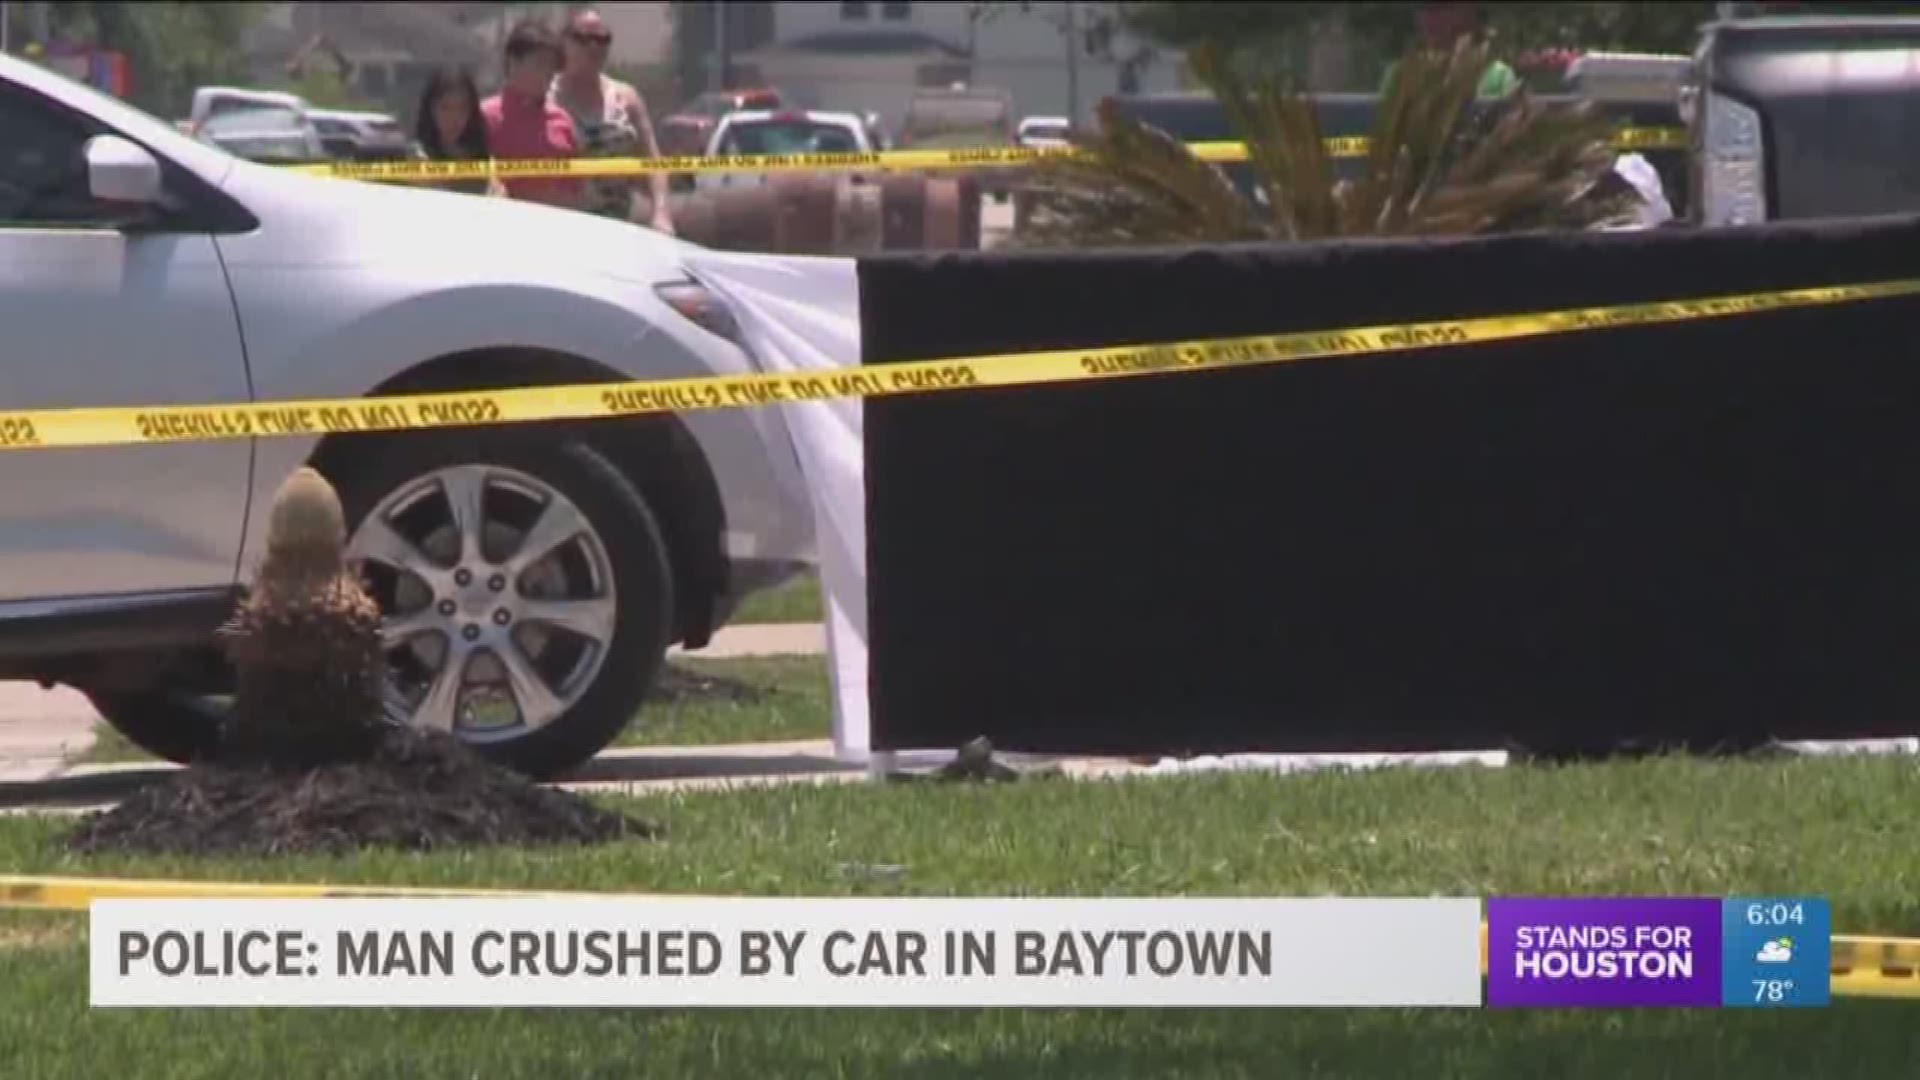 A man was crushed while working on a car in a Baytown driveway. 